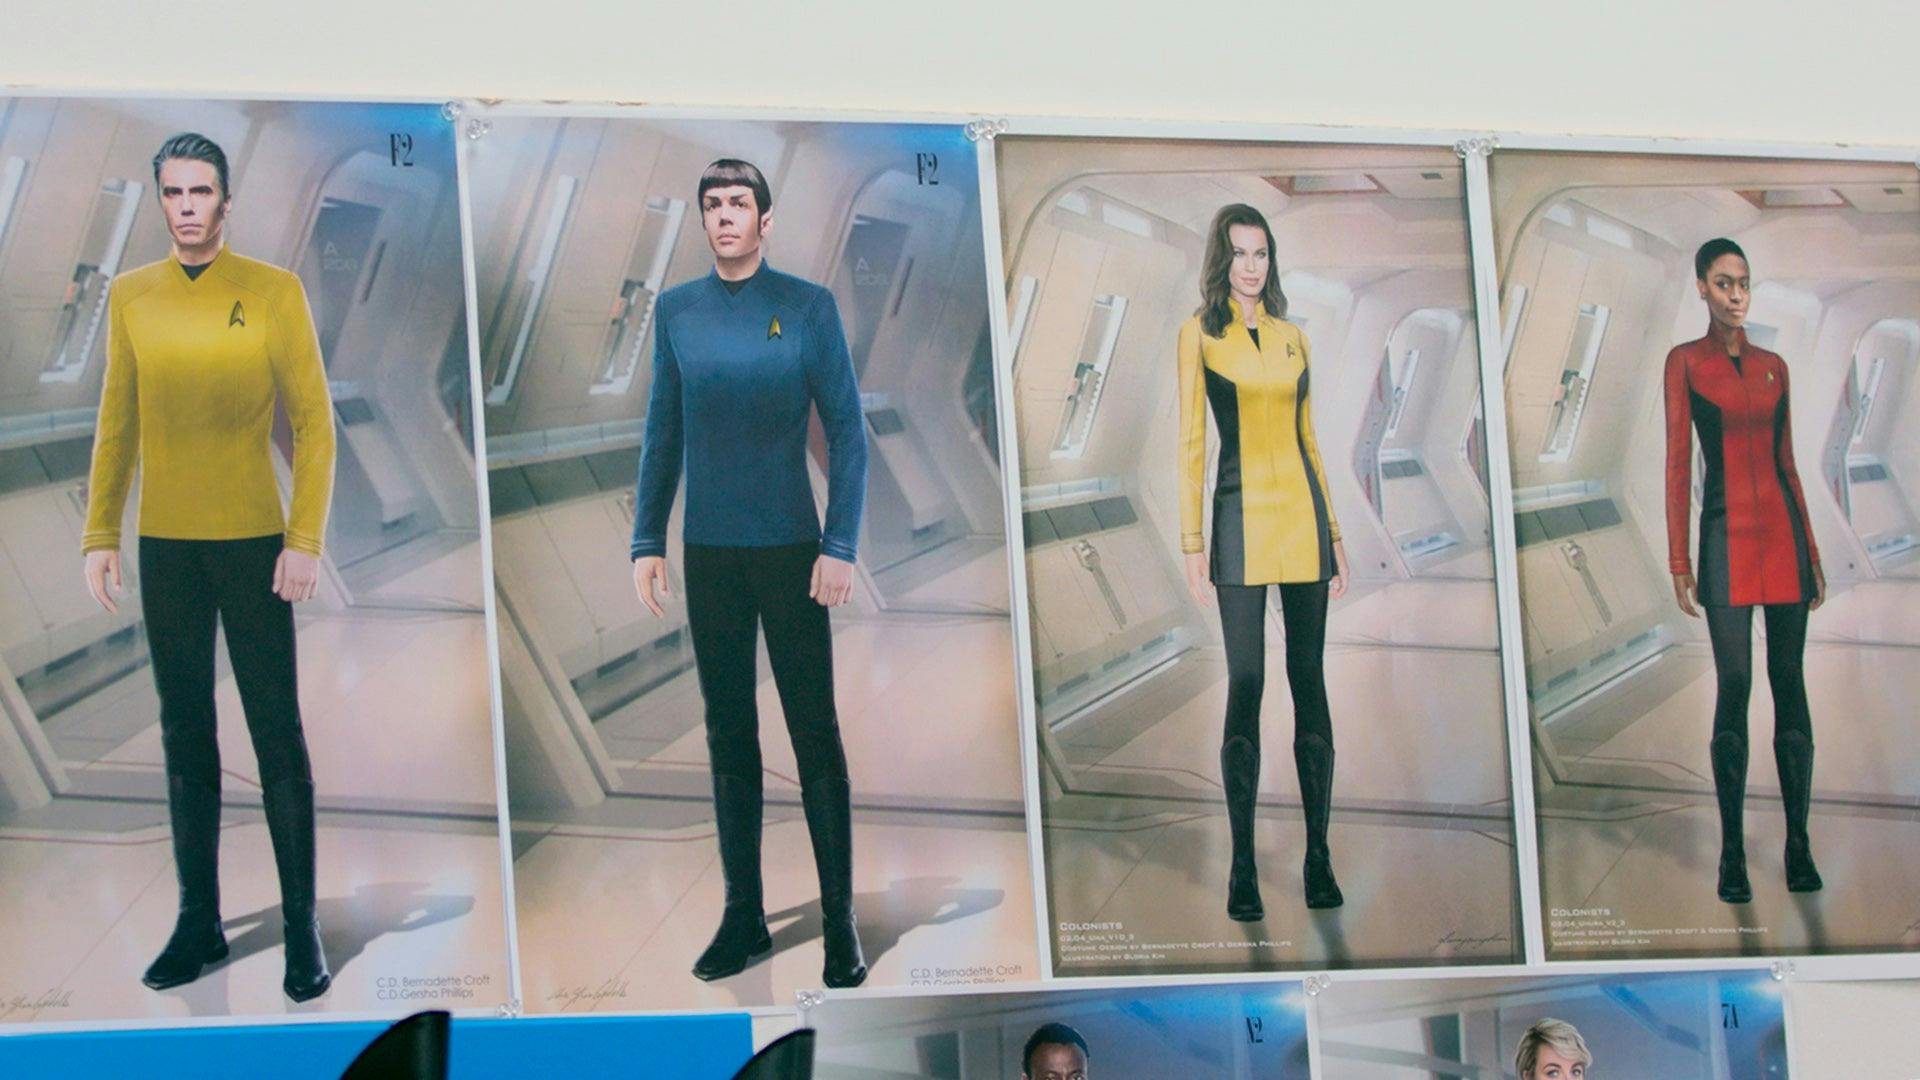 Uniform designs featuring Pike, Spock, Una, and Uhura 